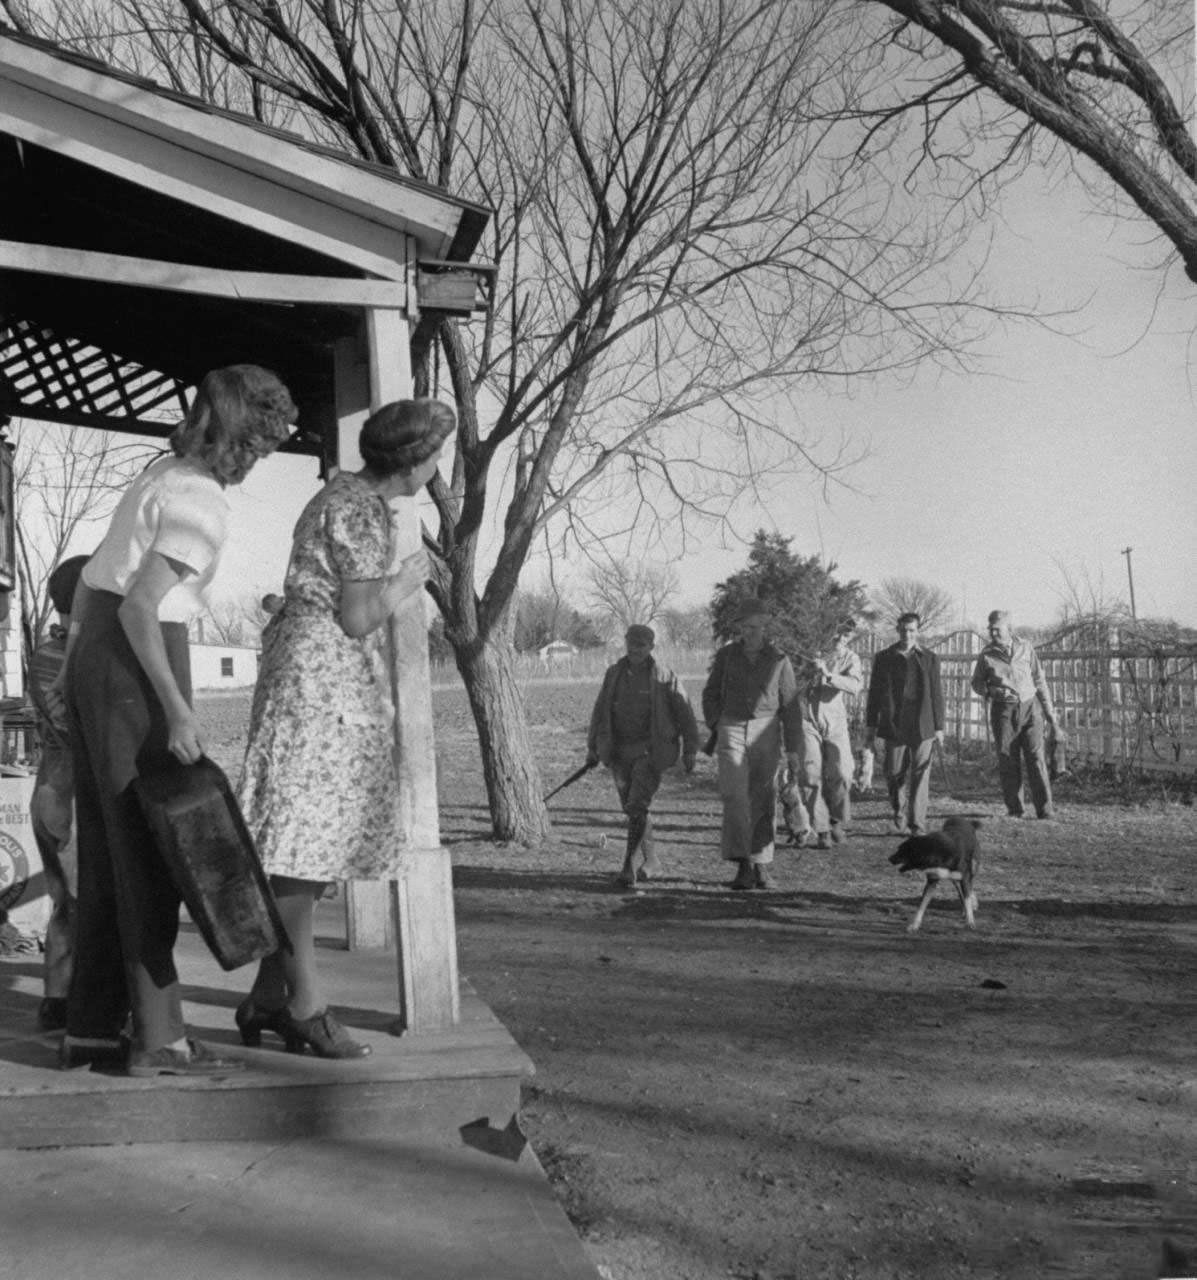 Mrs. James Ferdinand Irwin (L) standing on porch watching the men in her family, most recently returned fr. service in WWII, carrying home freshly shot rabbits and a cedar tree for Christmas family reunion.